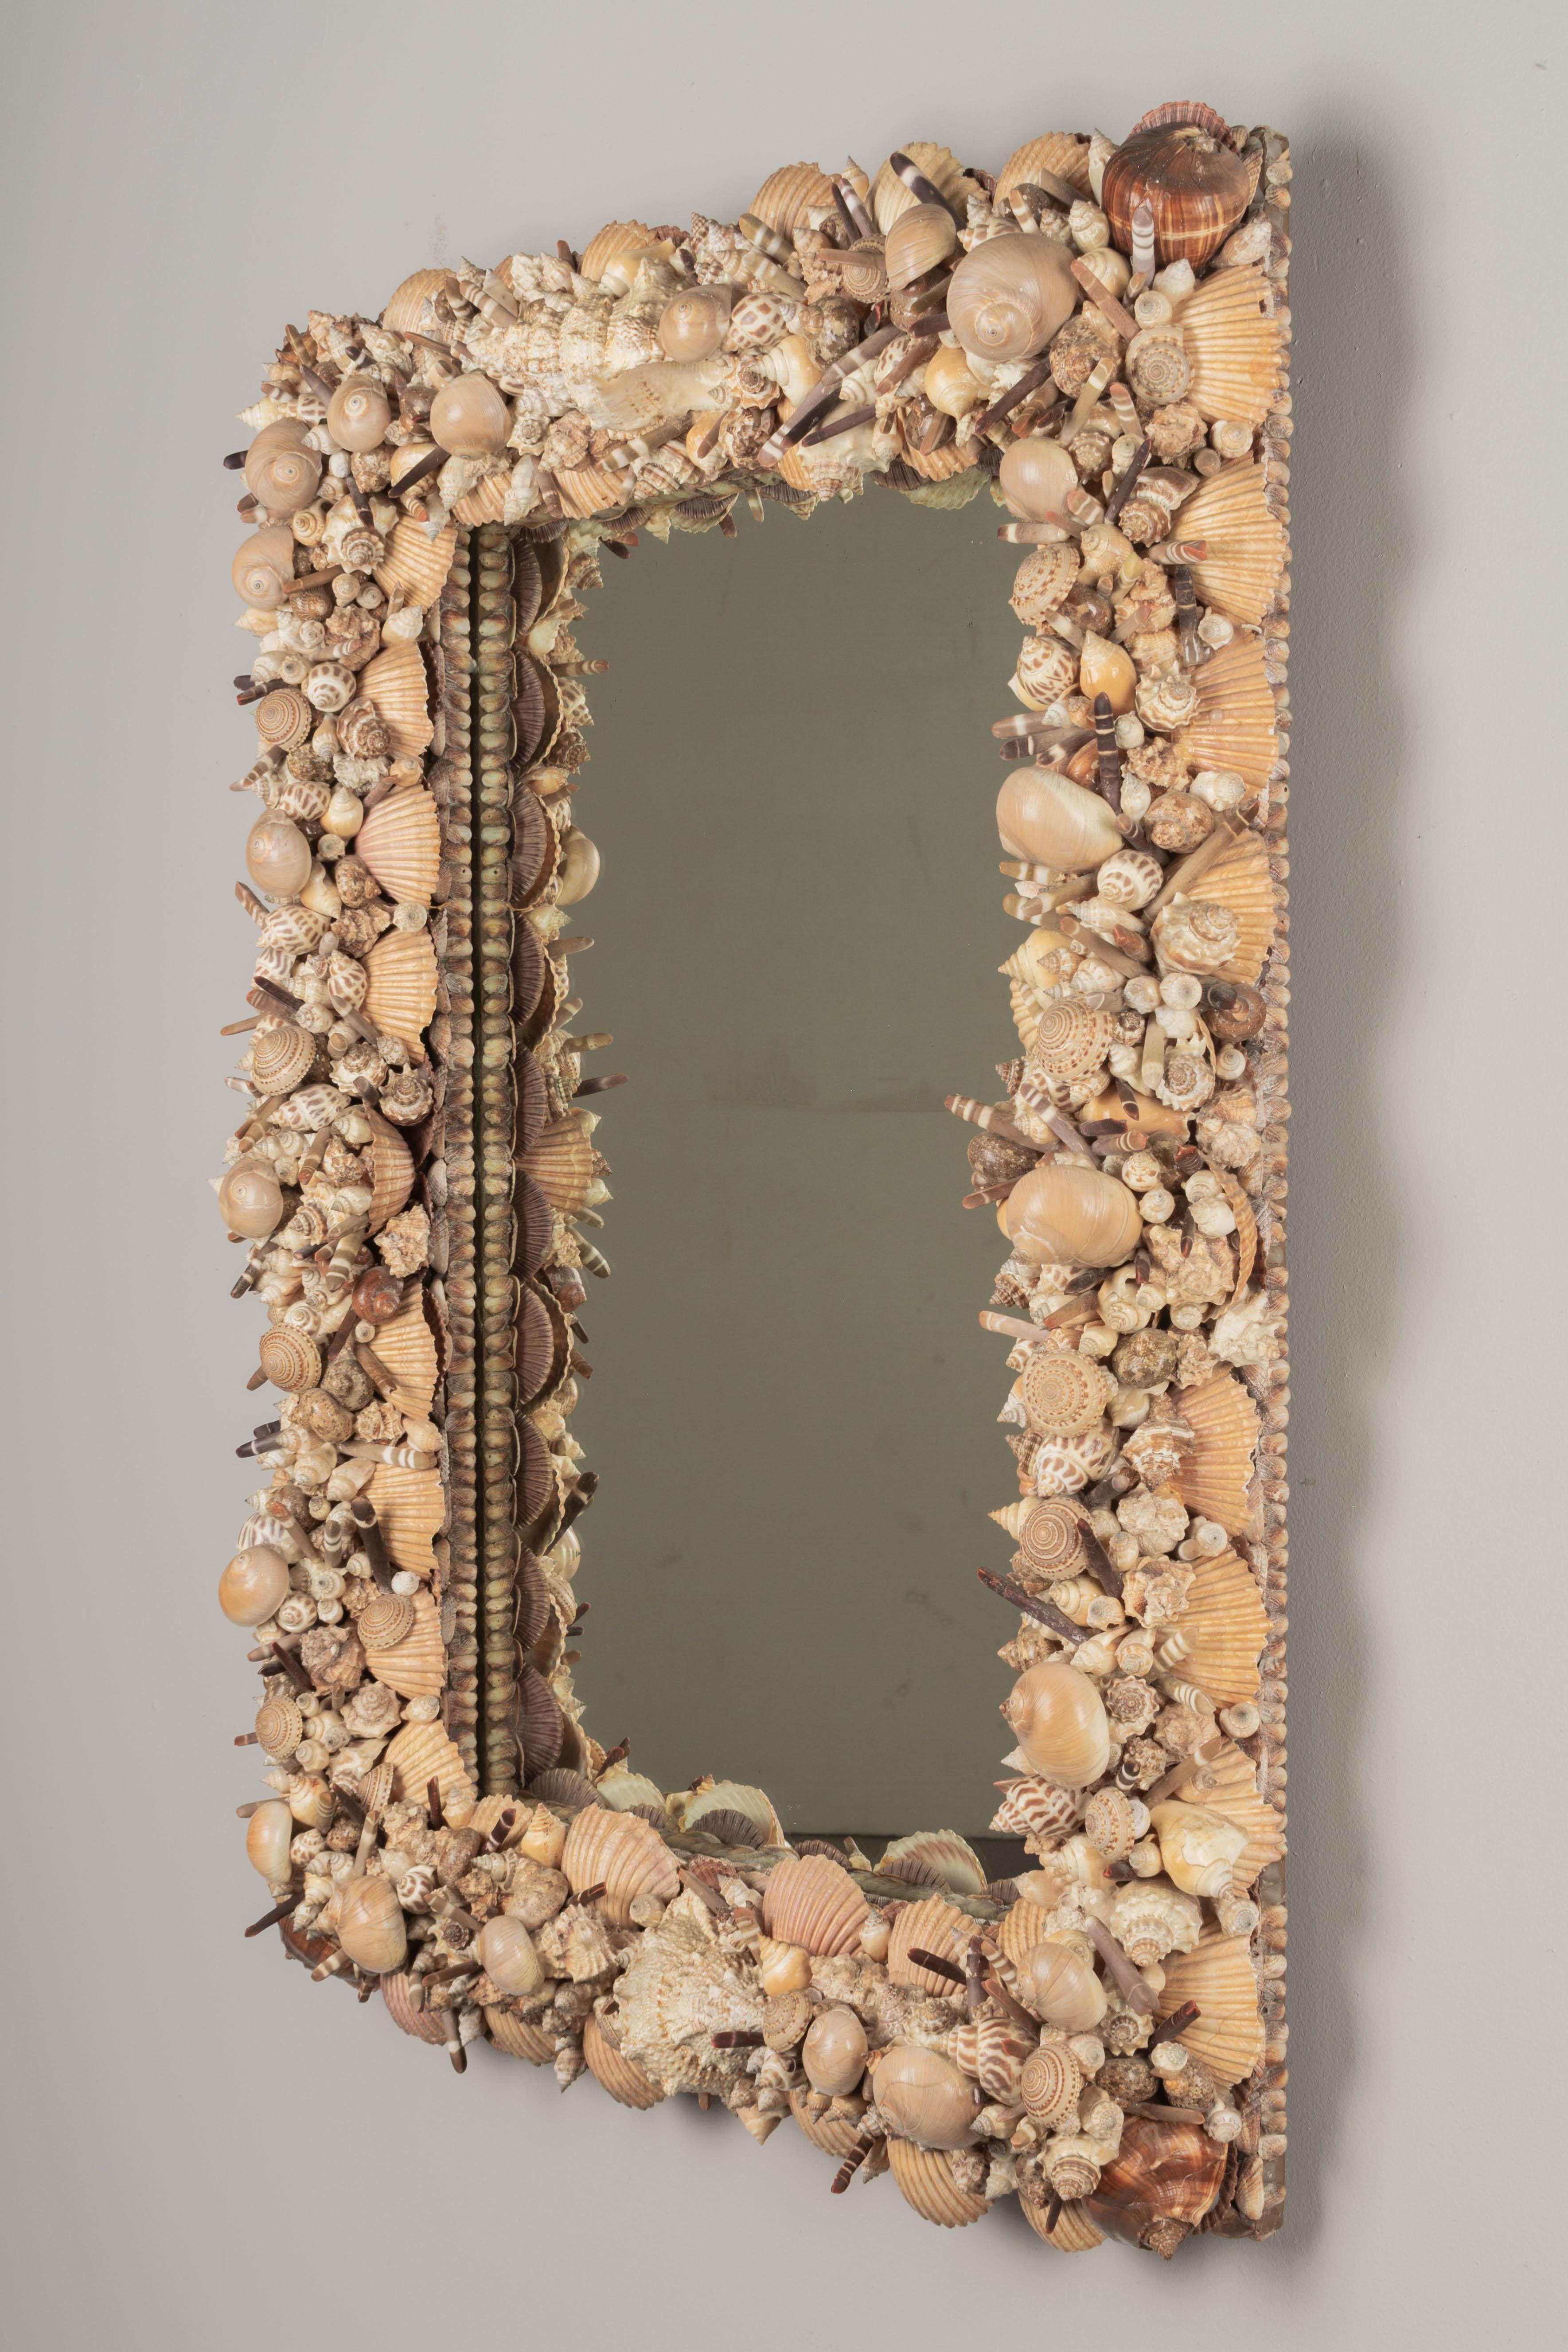 North American Mid Century Seashell Encrusted Wall Mirror For Sale